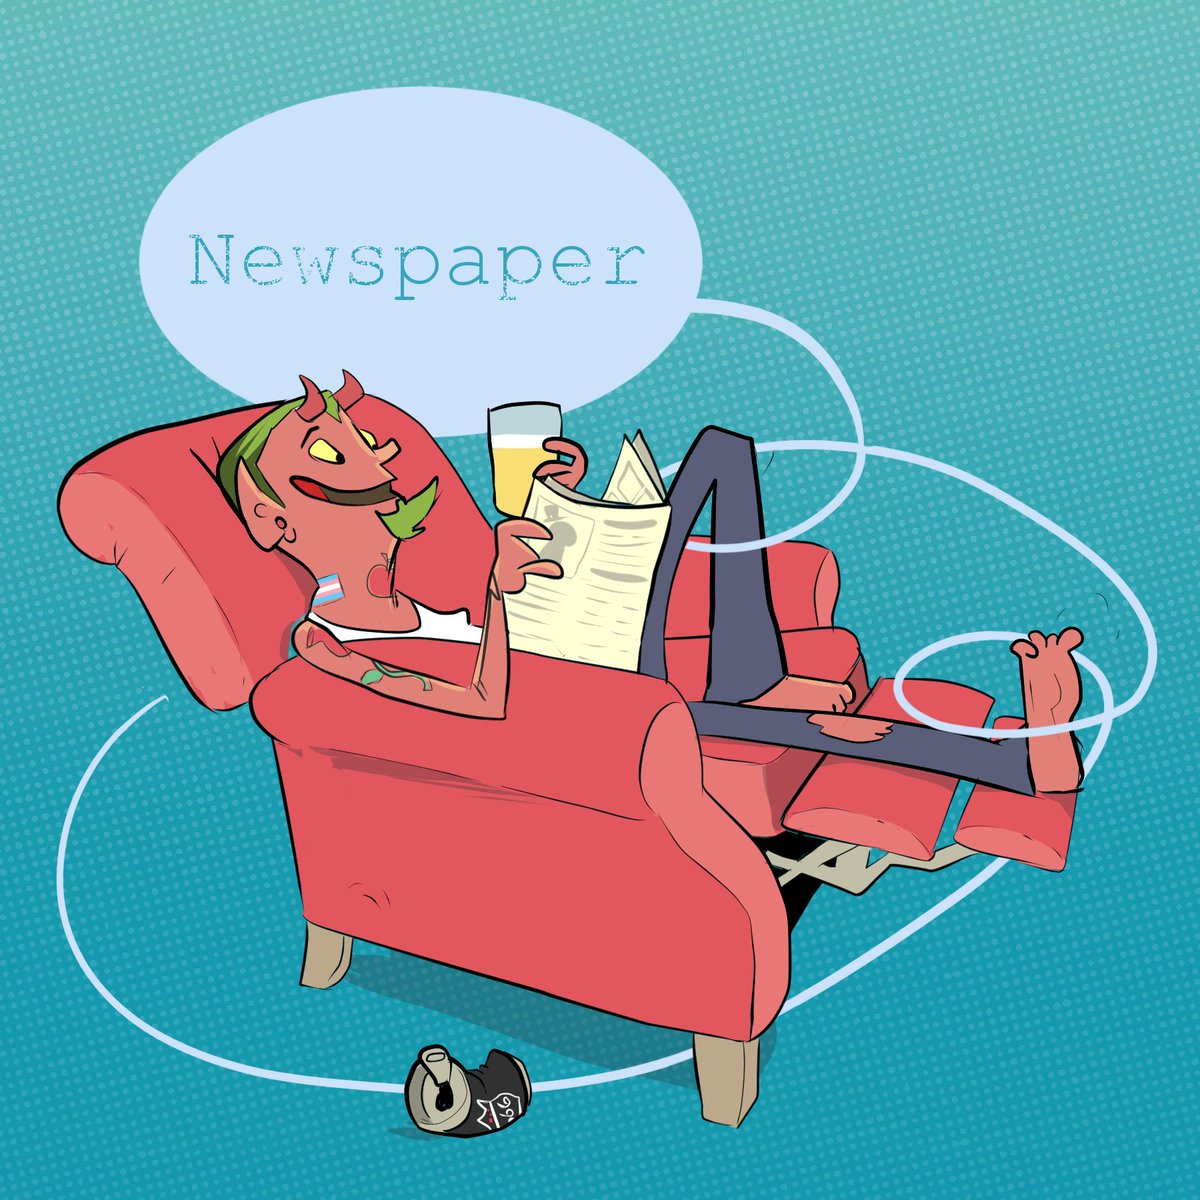 The word for this week’s #AnimalAlphabets is ‘Newspaper’. Sometimes it's just nice to relax and read the comics section. @animalalphabets #characterdesign #newspaper #devil #comicstrips